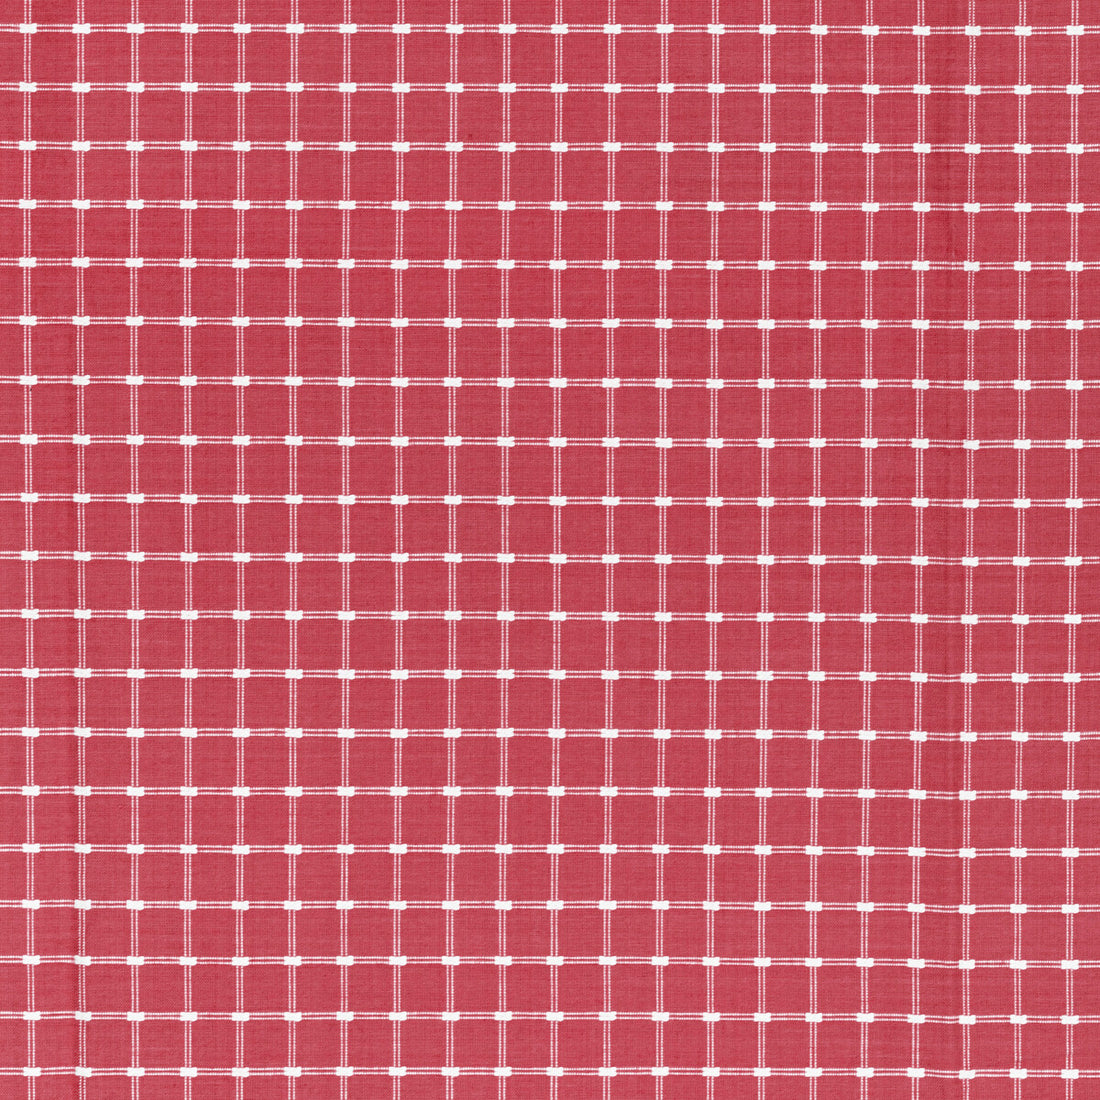 Lison Check fabric in berry color - pattern 8022116.77.0 - by Brunschwig &amp; Fils in the Normant Checks And Stripes II collection